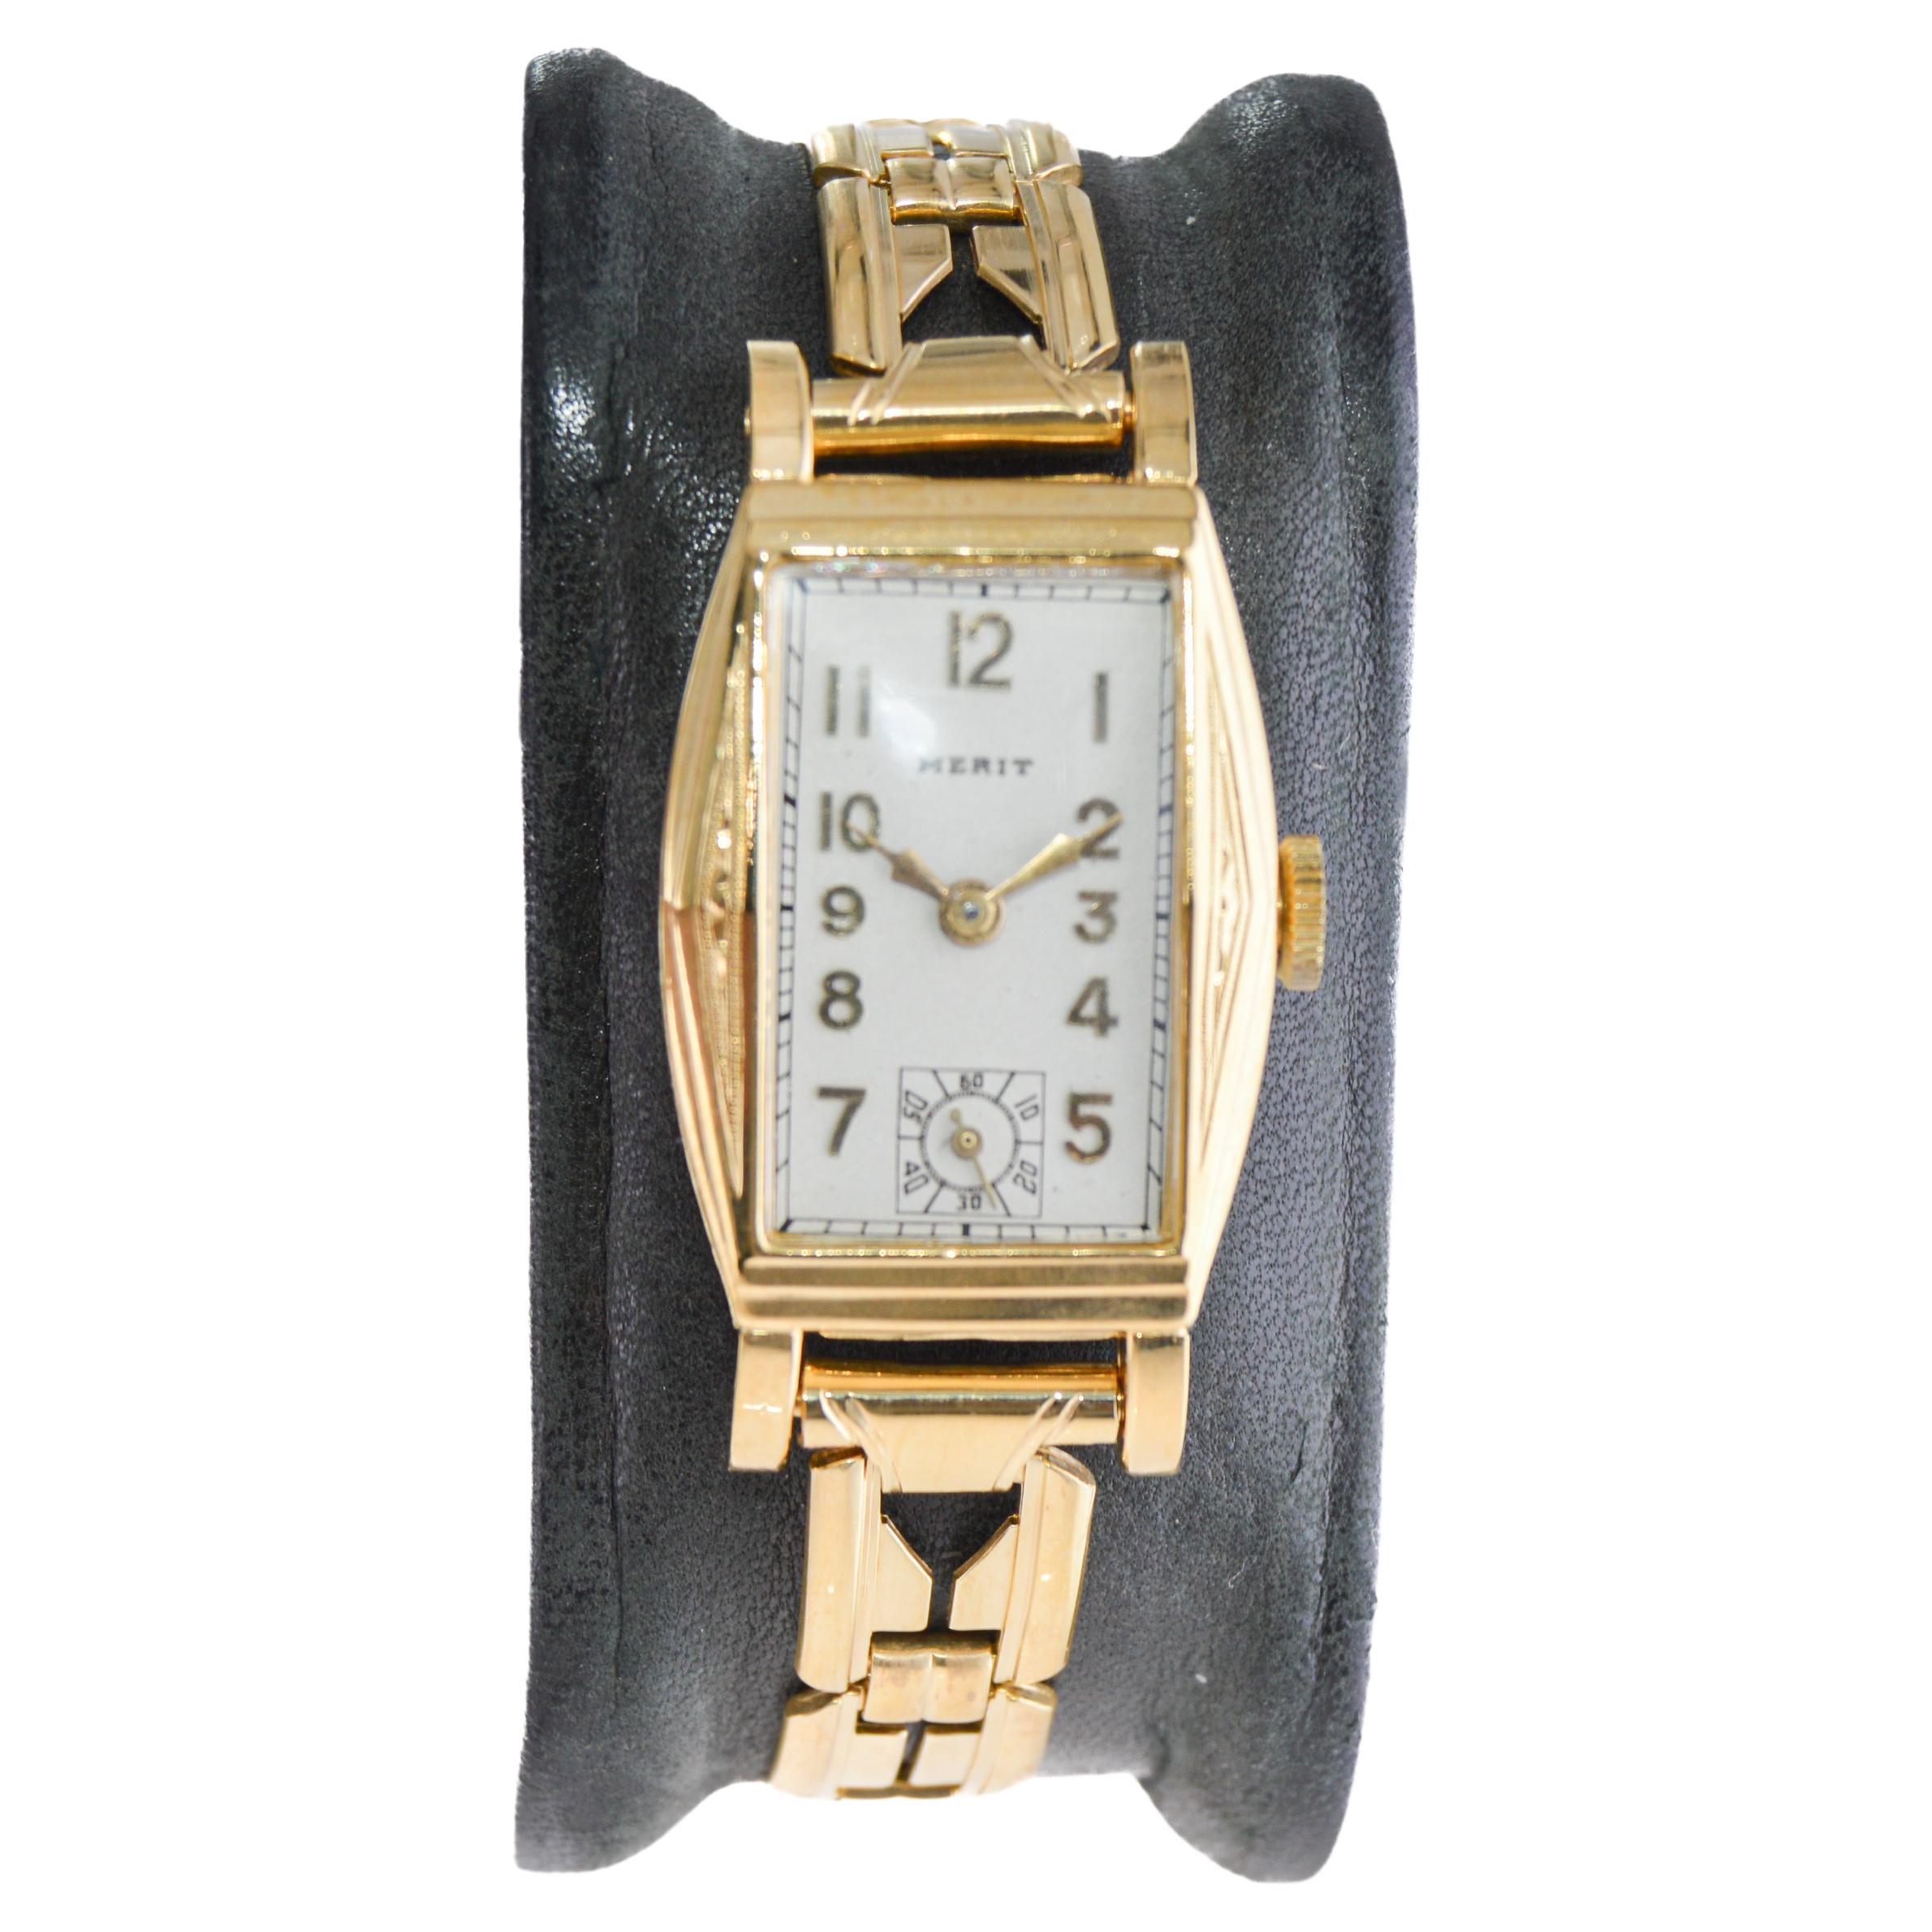 Merit Gold-Filled Art Deco Watch with Original Matching Bracelet circa 1940's For Sale